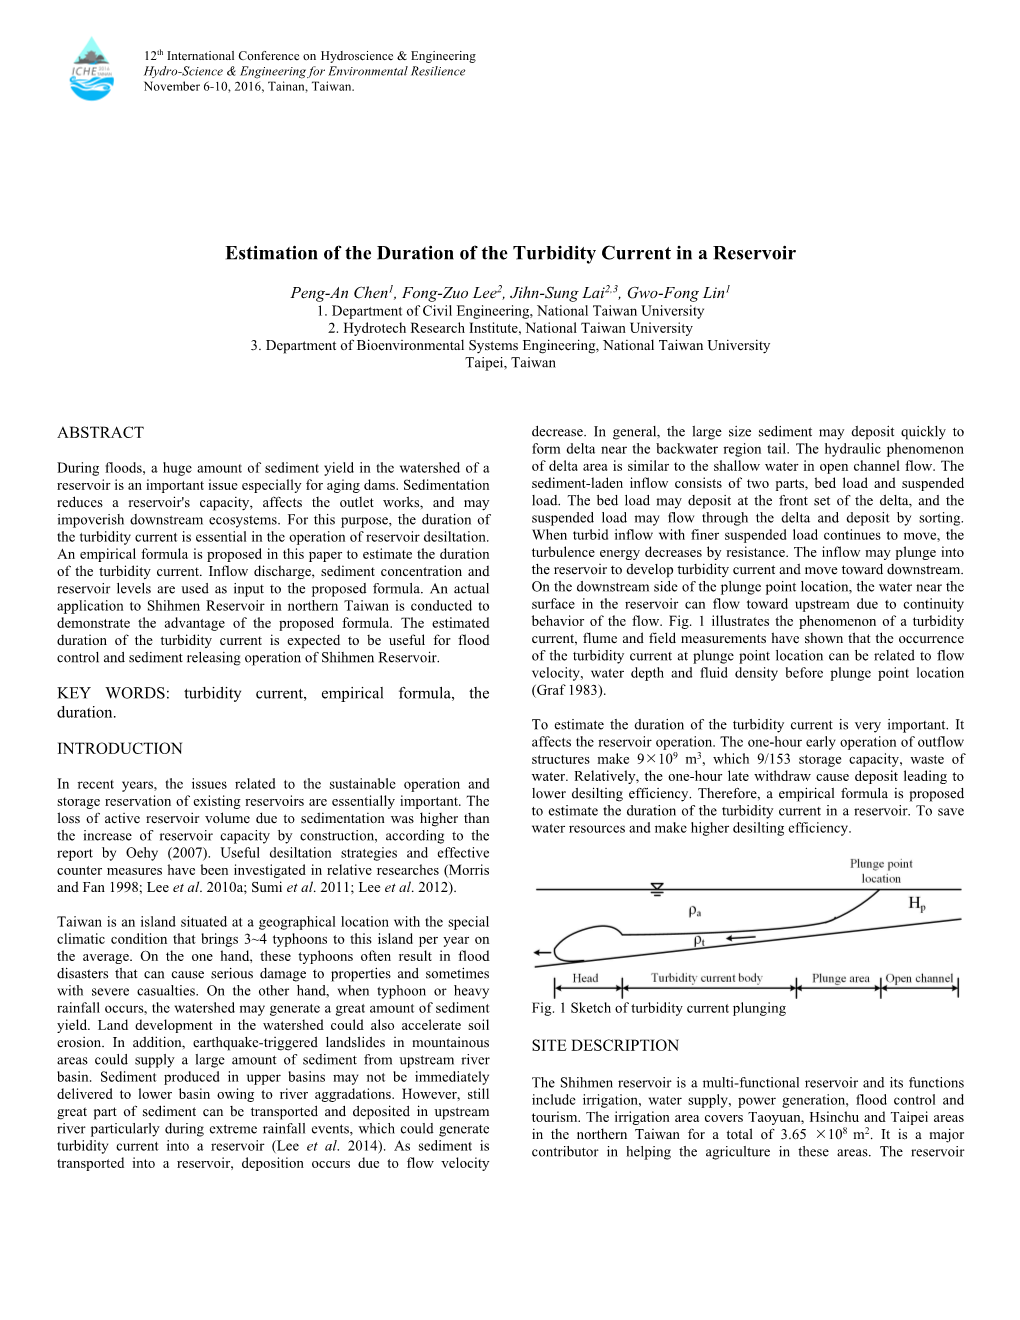 Estimation of the Duration of the Turbidity Current in a Reservoir